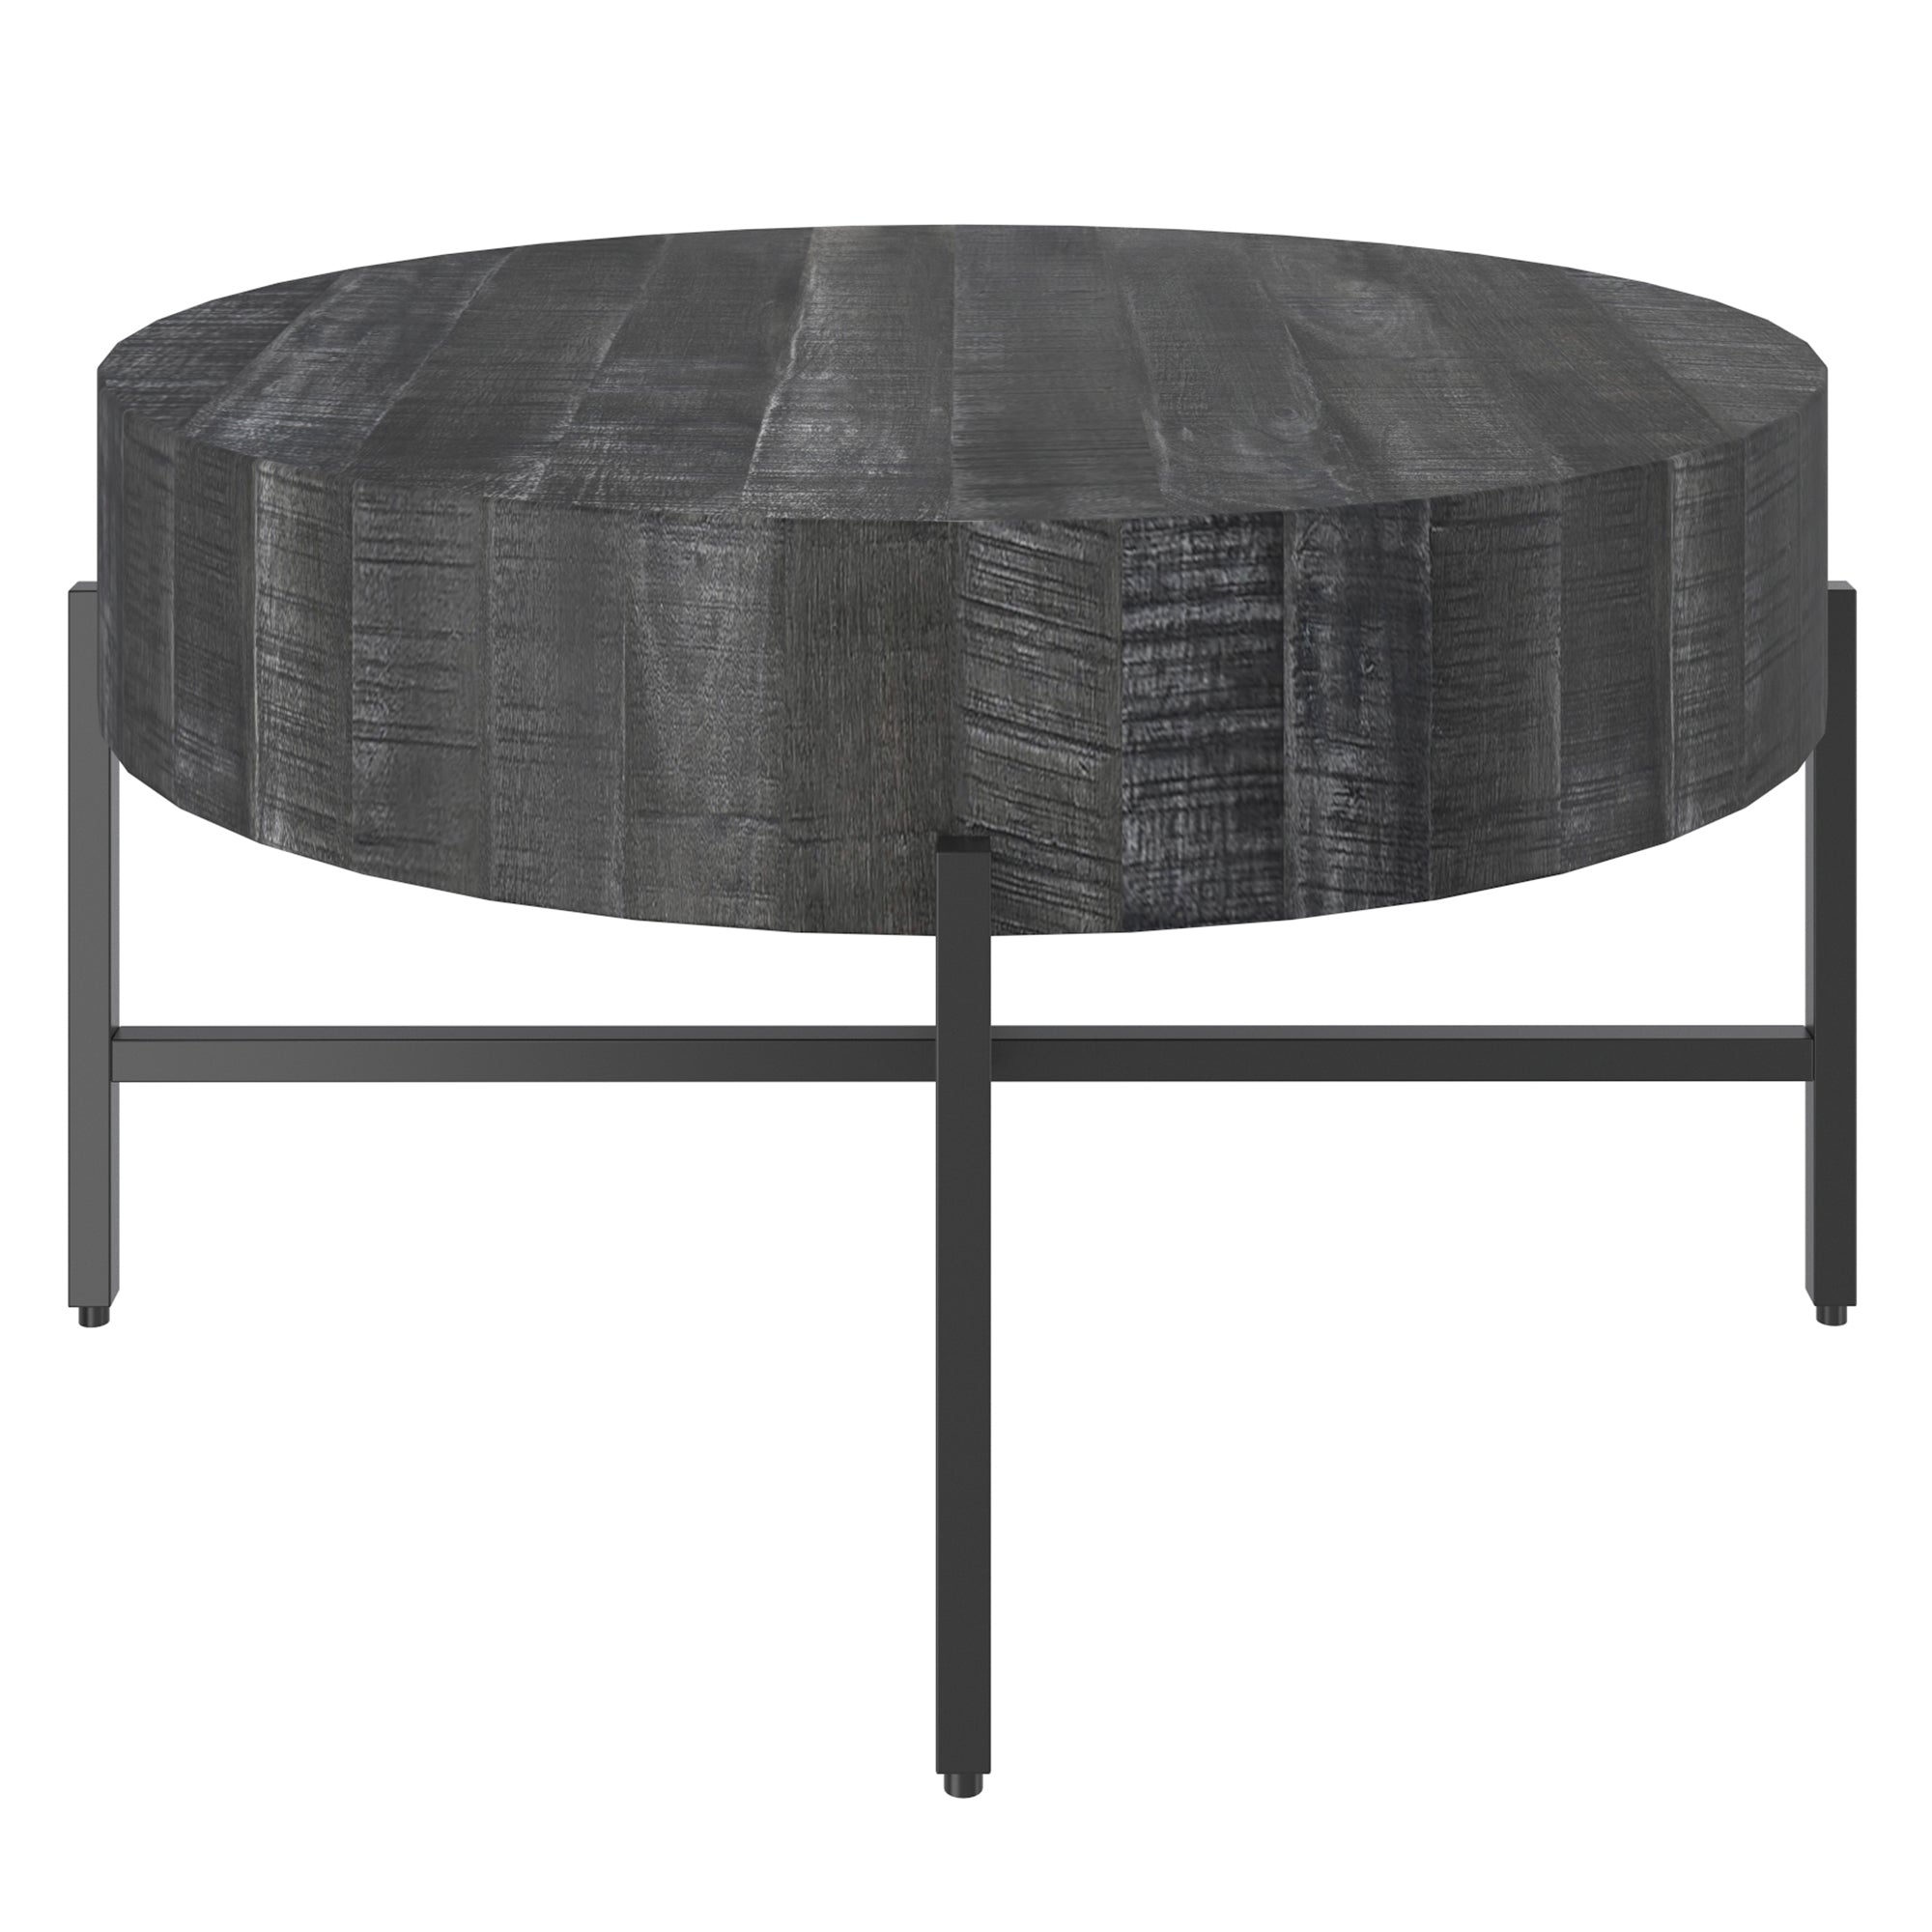 Blox Coffee Table in Grey 301-528GY